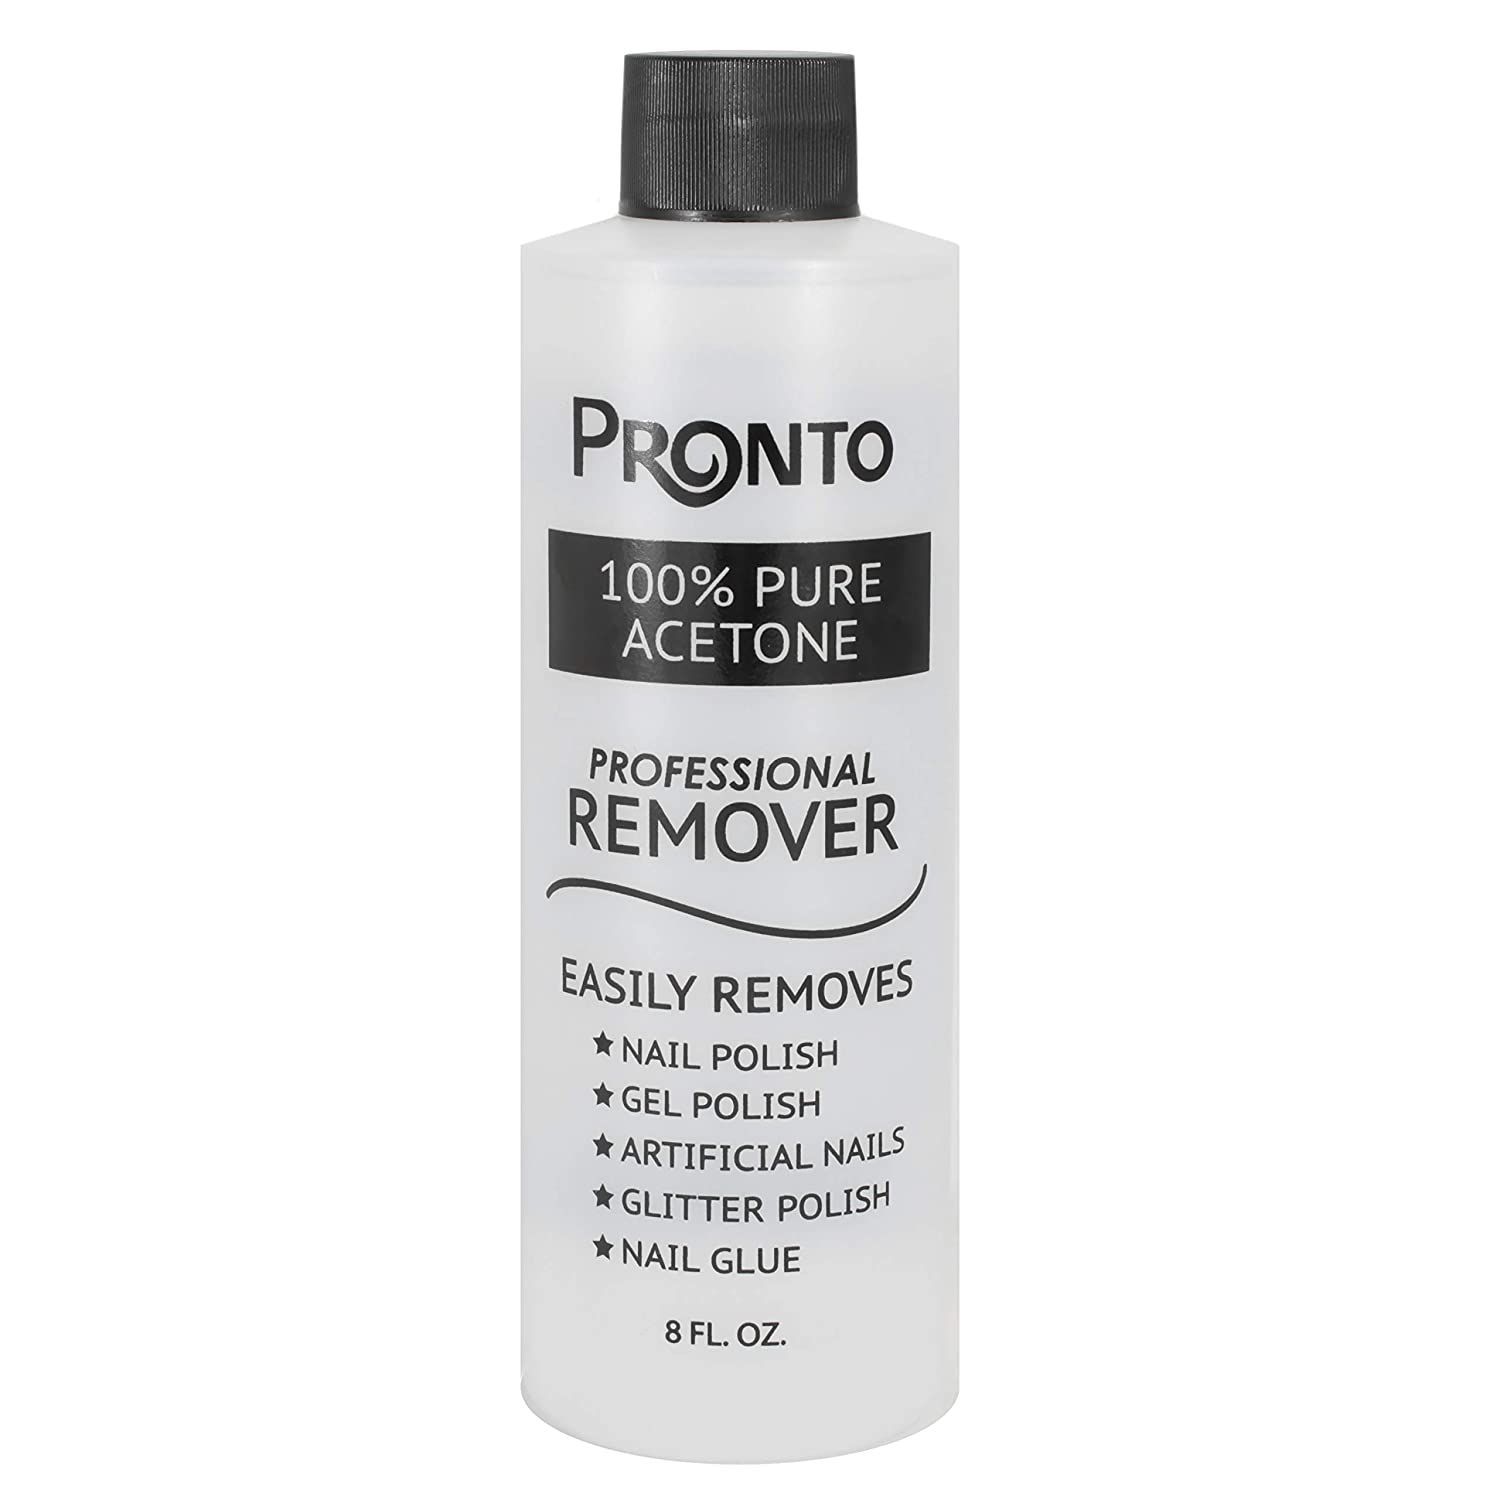 15 Best Gentle Nail Polish Removers 2021 - The 15 Best Nail Polish Removers  You Need For A Fresh Mani